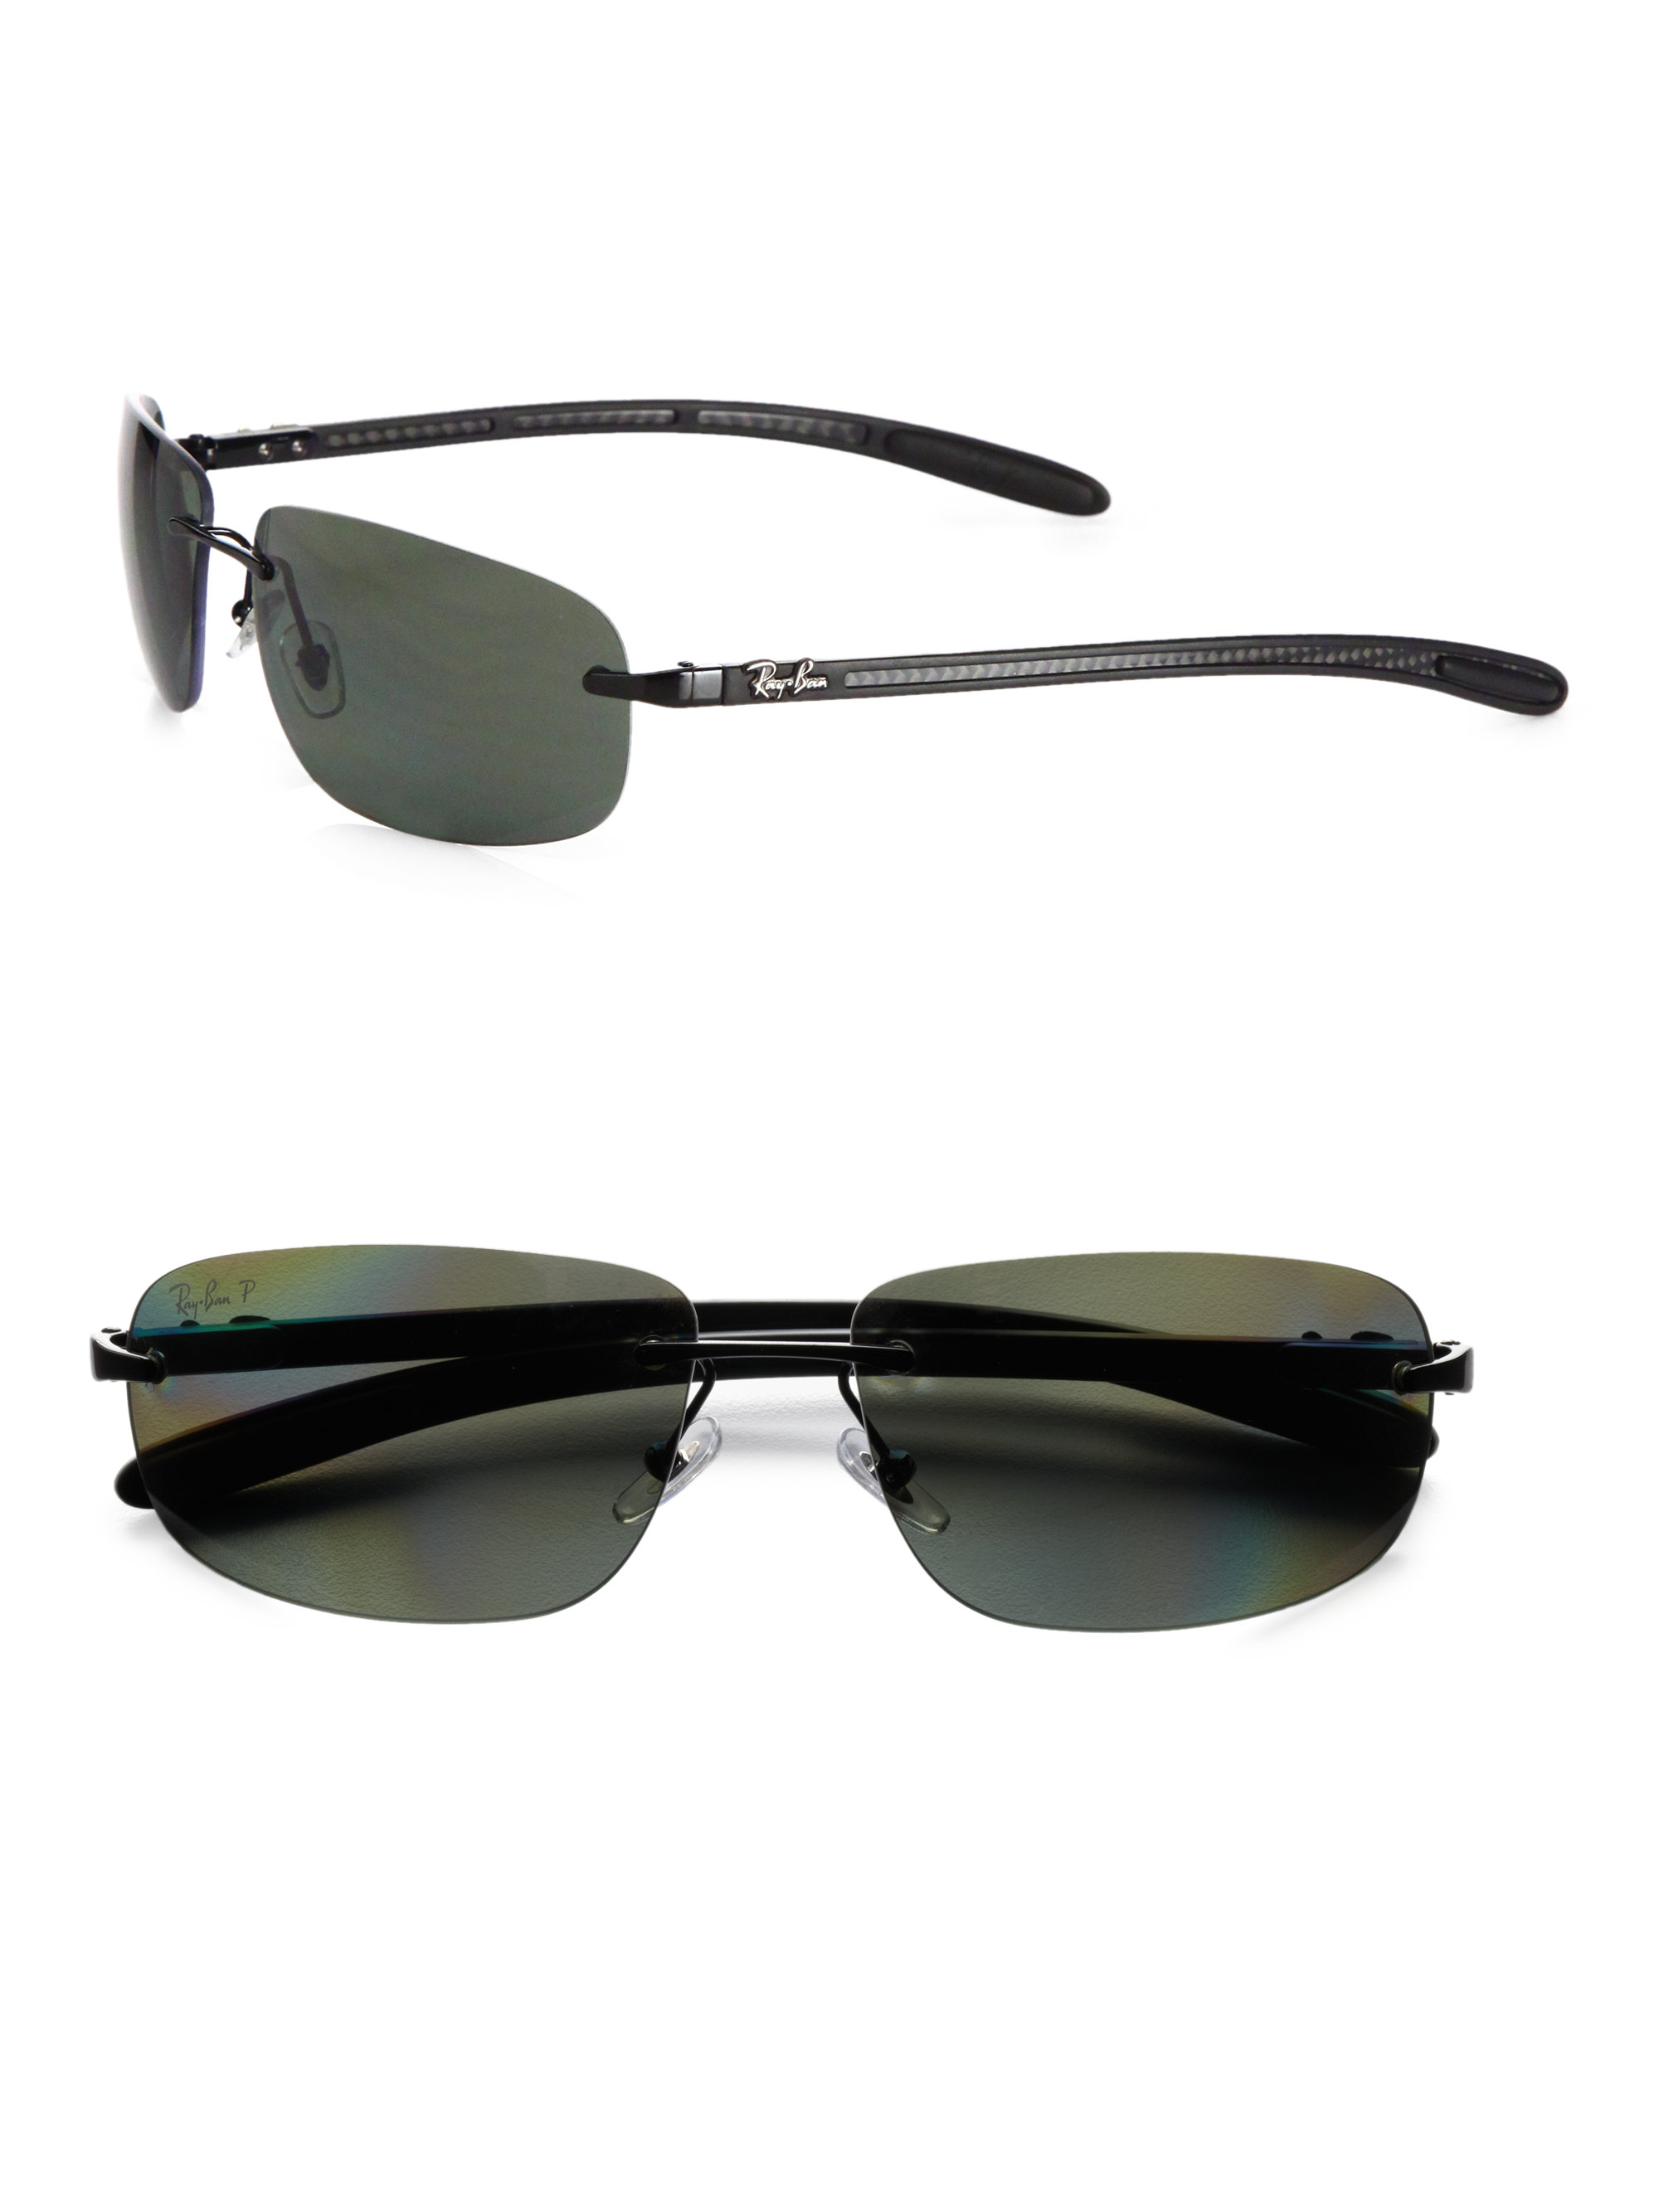 Lyst RayBan Tech Rimless Metal Sunglasses in Black for Men